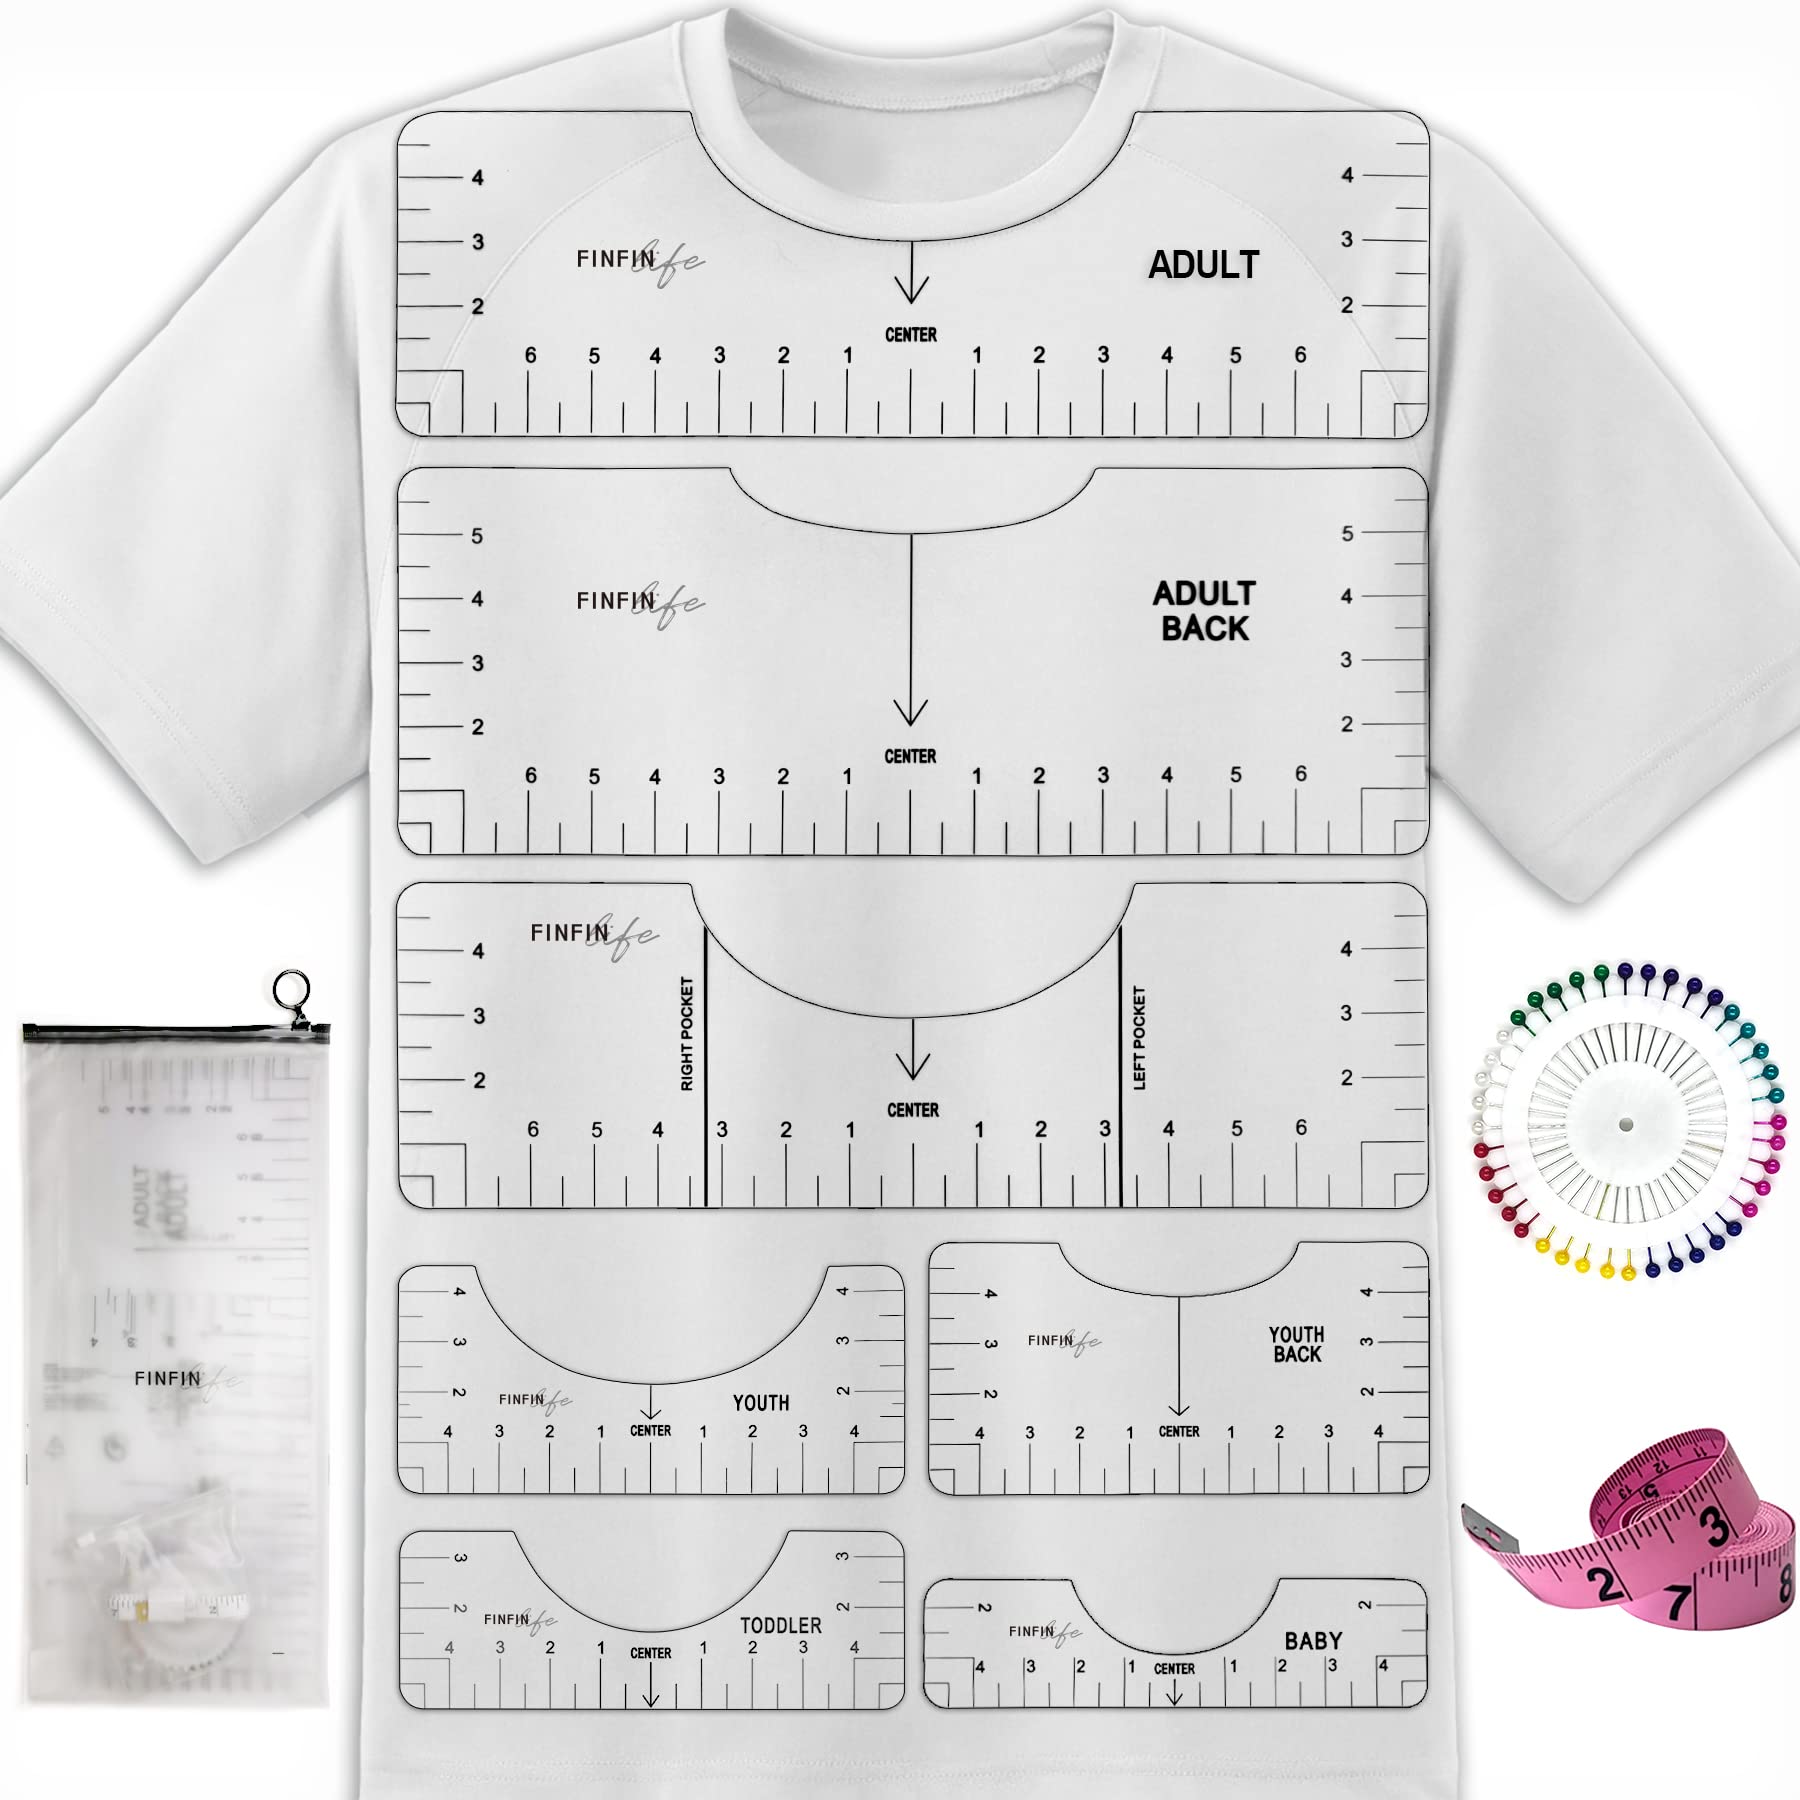 2 Pack Tshirt Ruler Guide for Vinyl Alignment, T Shirt Rulers to